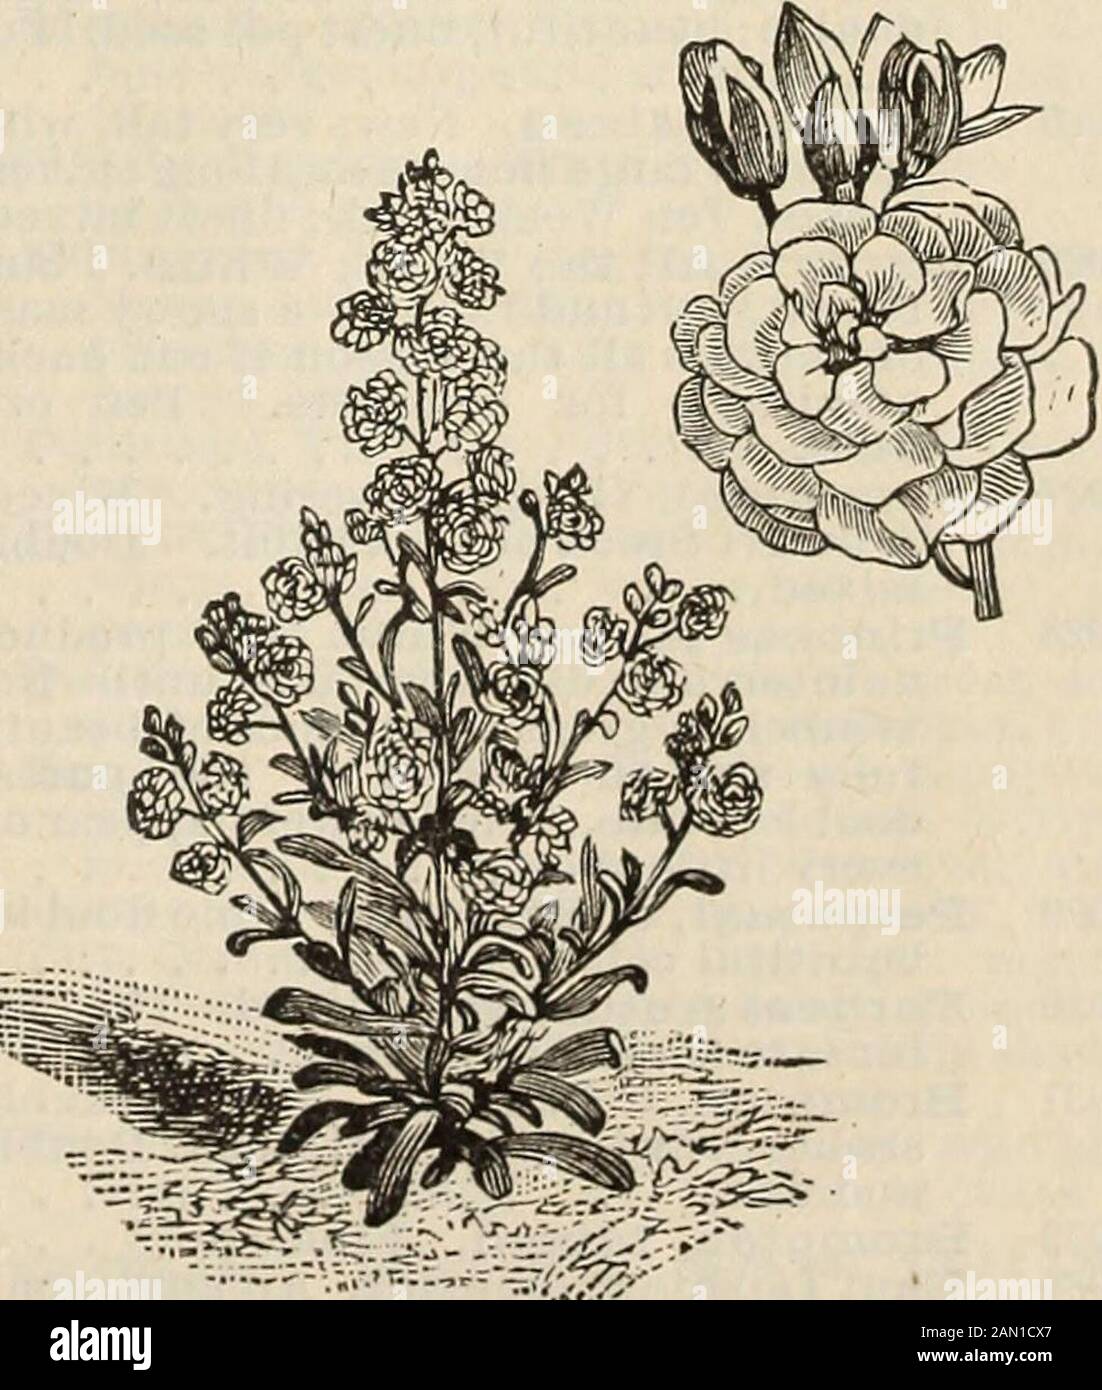 R & J Farquhar & Co's catalogue 1894 : reliable tested seeds plants bulbs fertilizers tools etc. . ches across.Charming for rockv/ork, 10 994 STACHYS Lanata.Silverleaved,hardy perennial; suitable for edgings, ribbonborders, etc. Height, six inches. Peroz.,30c. .05 STATICE. Free-blooming plants withpeculiar flowers, which remain long inperfection. Excellent for winter bou-quets of Everlastings. 995 Annual Varieties. Mixed 05 996 Perennial Varieties. Mixed, 05 997 Halfordi. Blue. Fine greenhouse plant. Uft., 10 998 Suworowi. New; long spikes of pink flowers; free bloomer; annual, 10 999 STELLARI Stock Photo